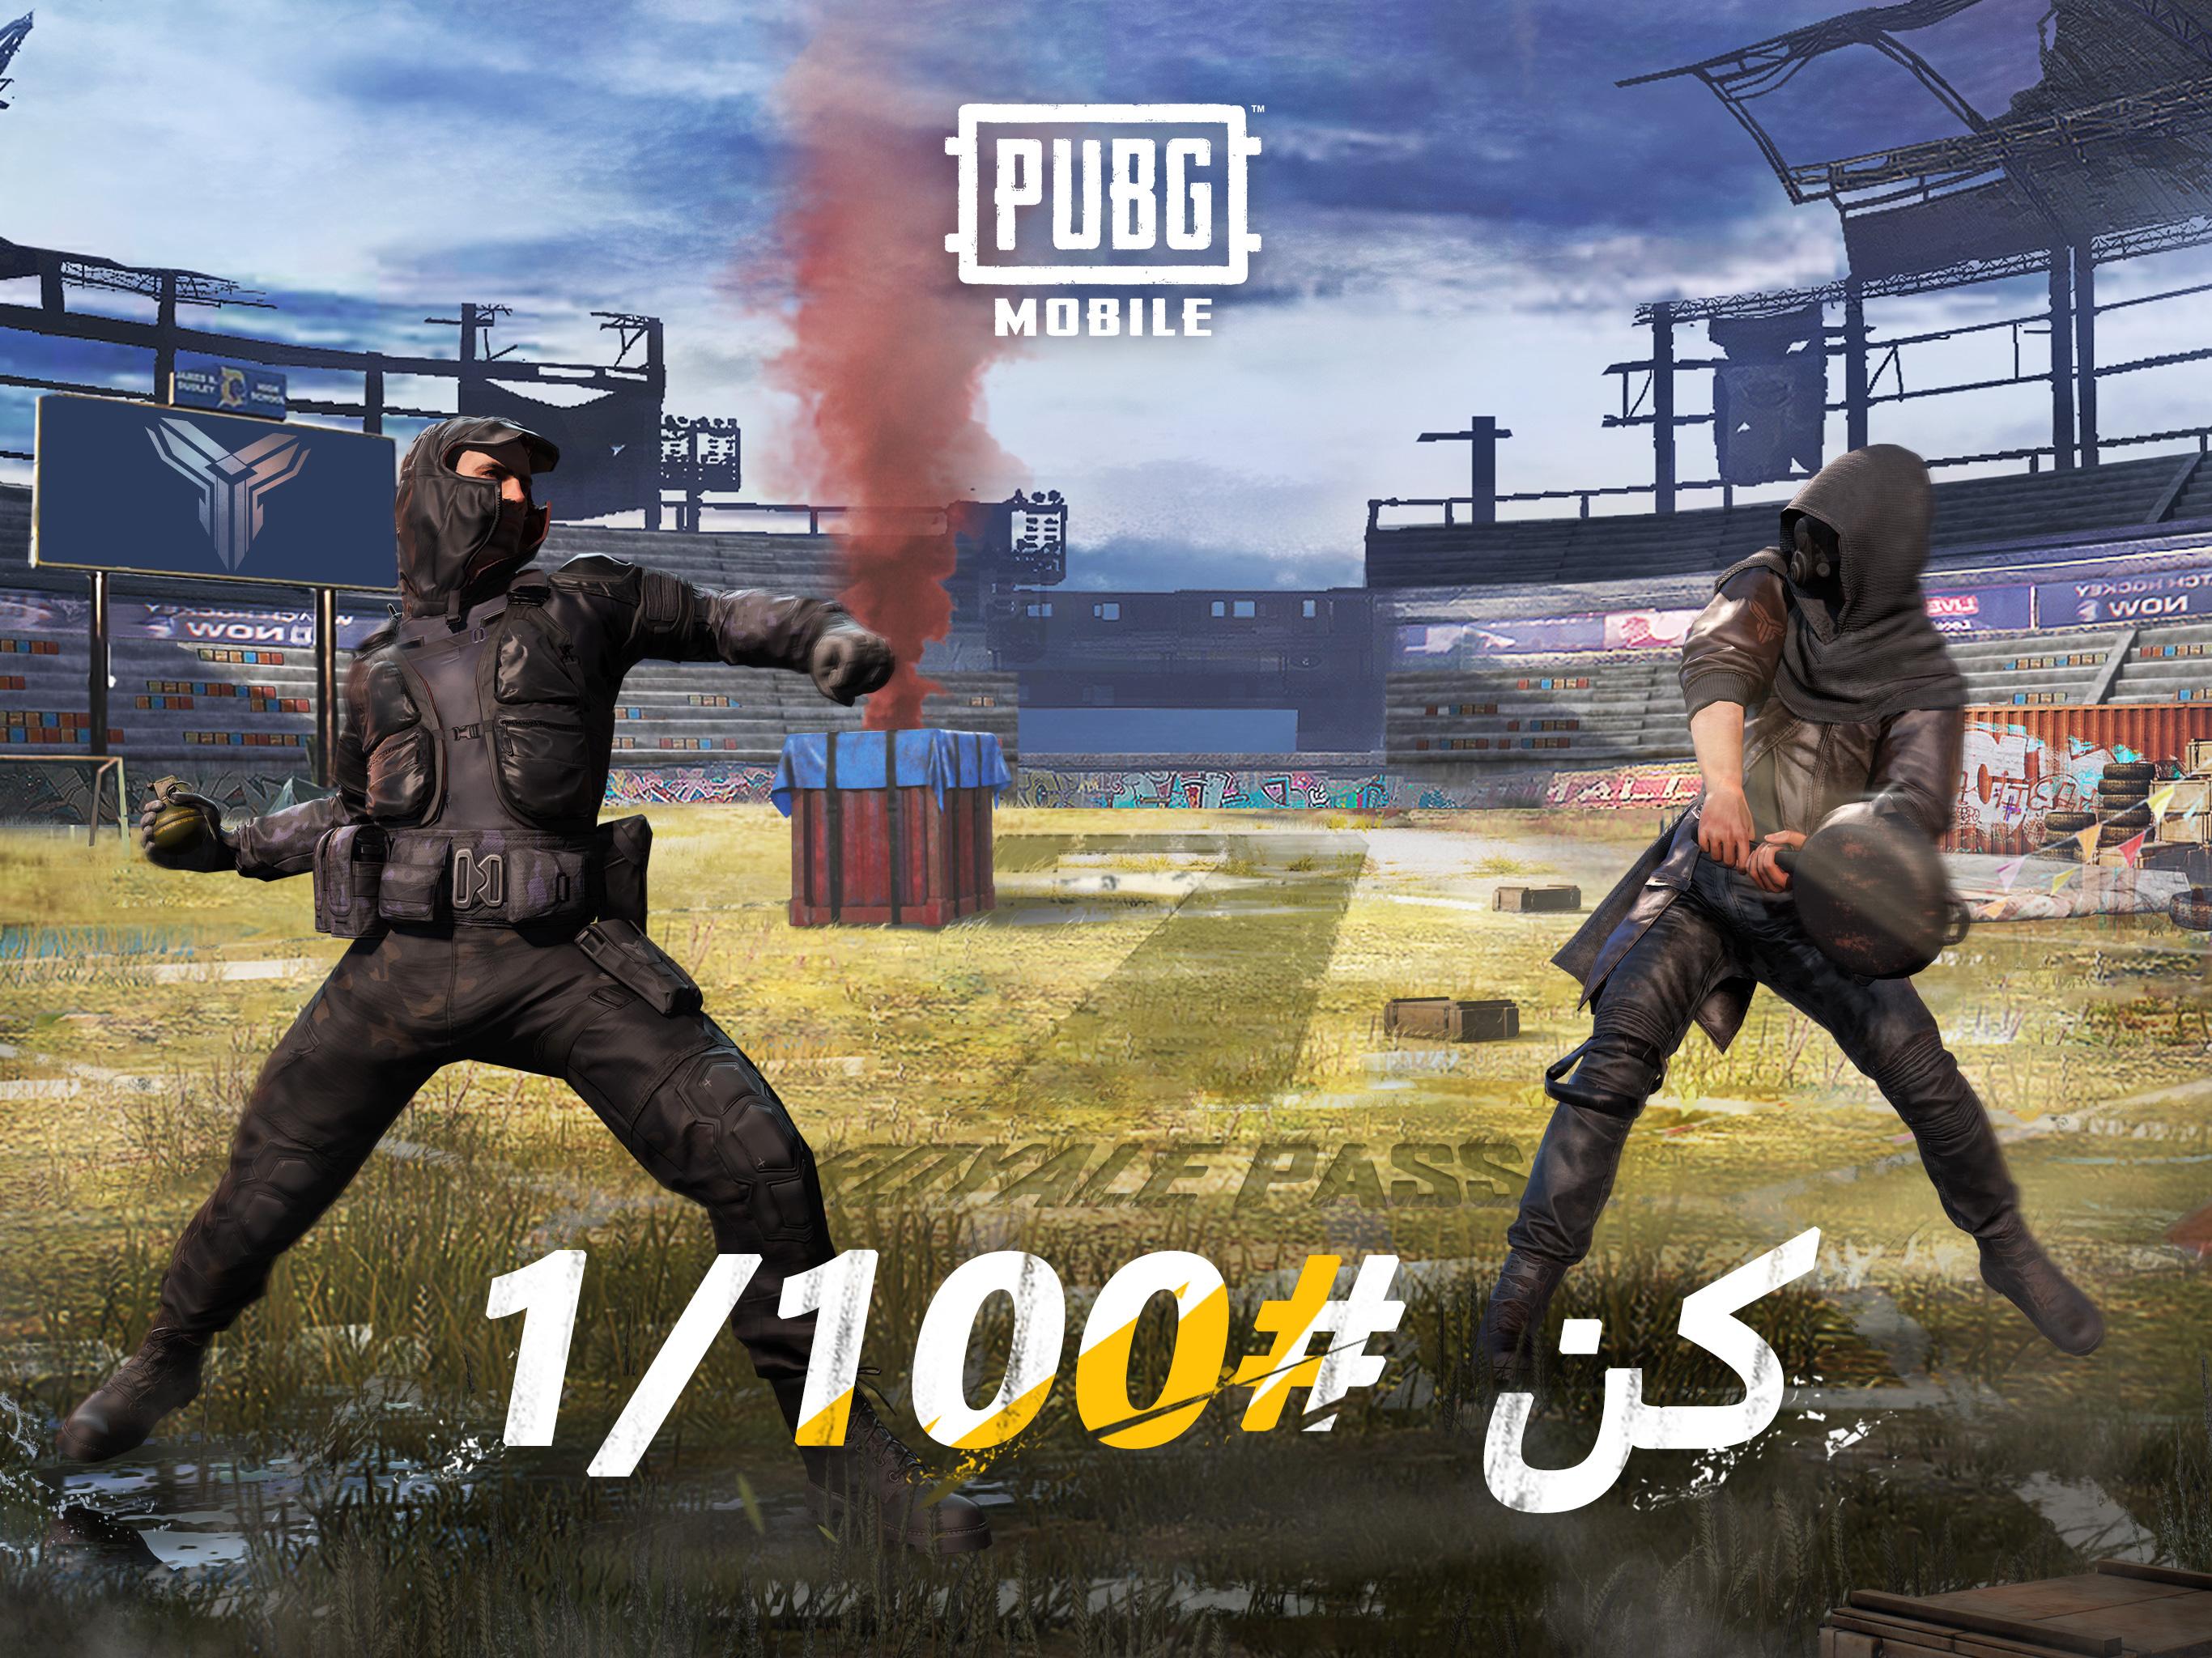 Pubg Mobile Images Hd Download | Pubg Bp And Uc - 